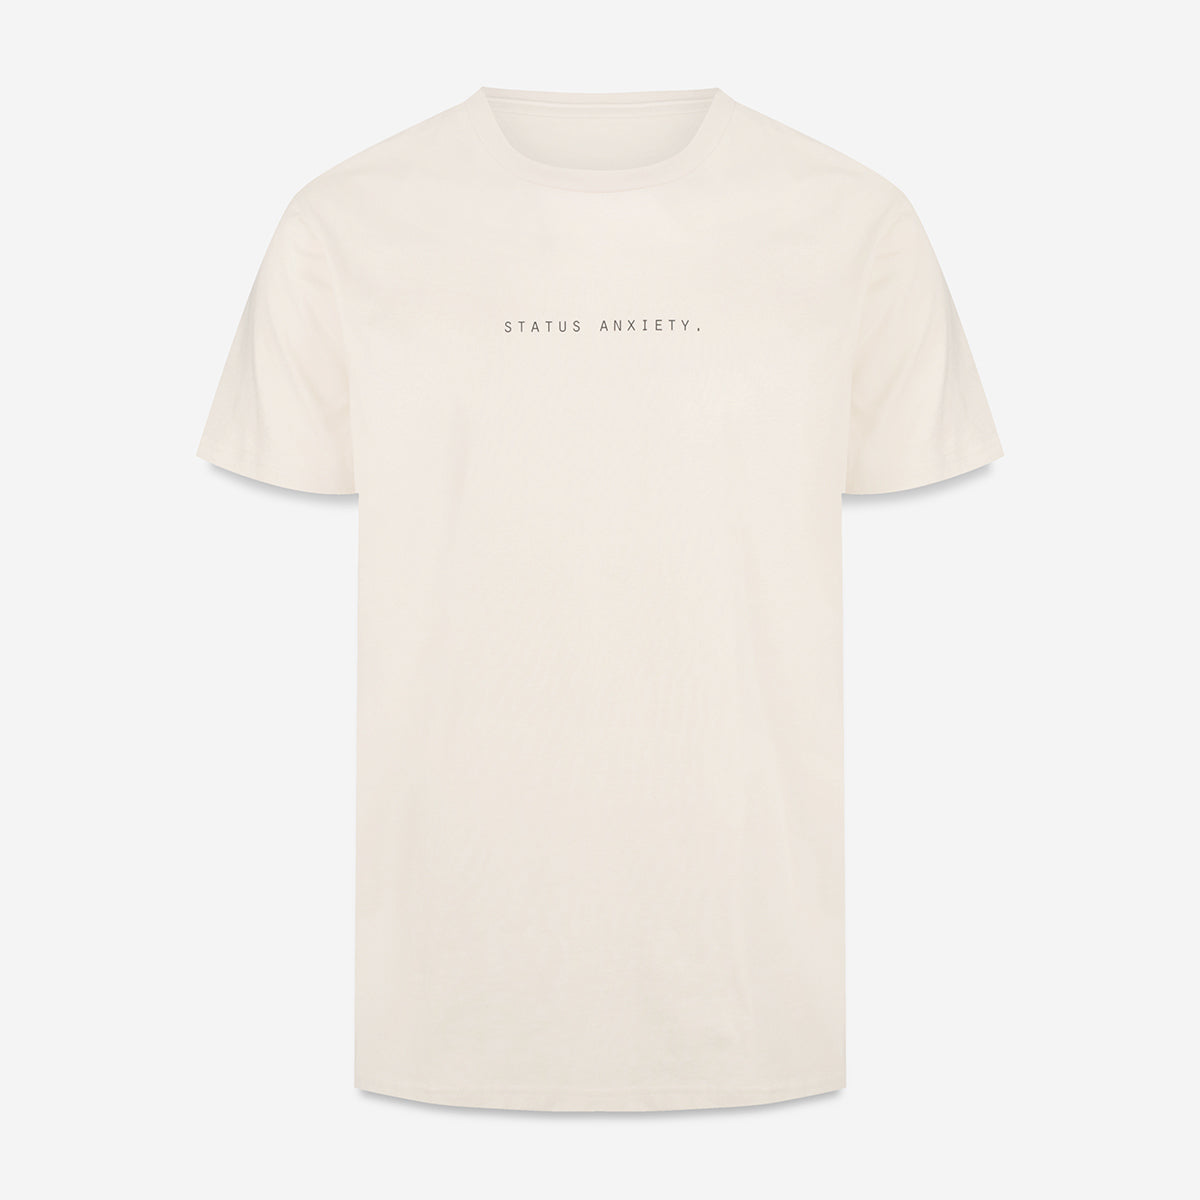 Status Anxiety Think It Over Men's T Shirt Off White